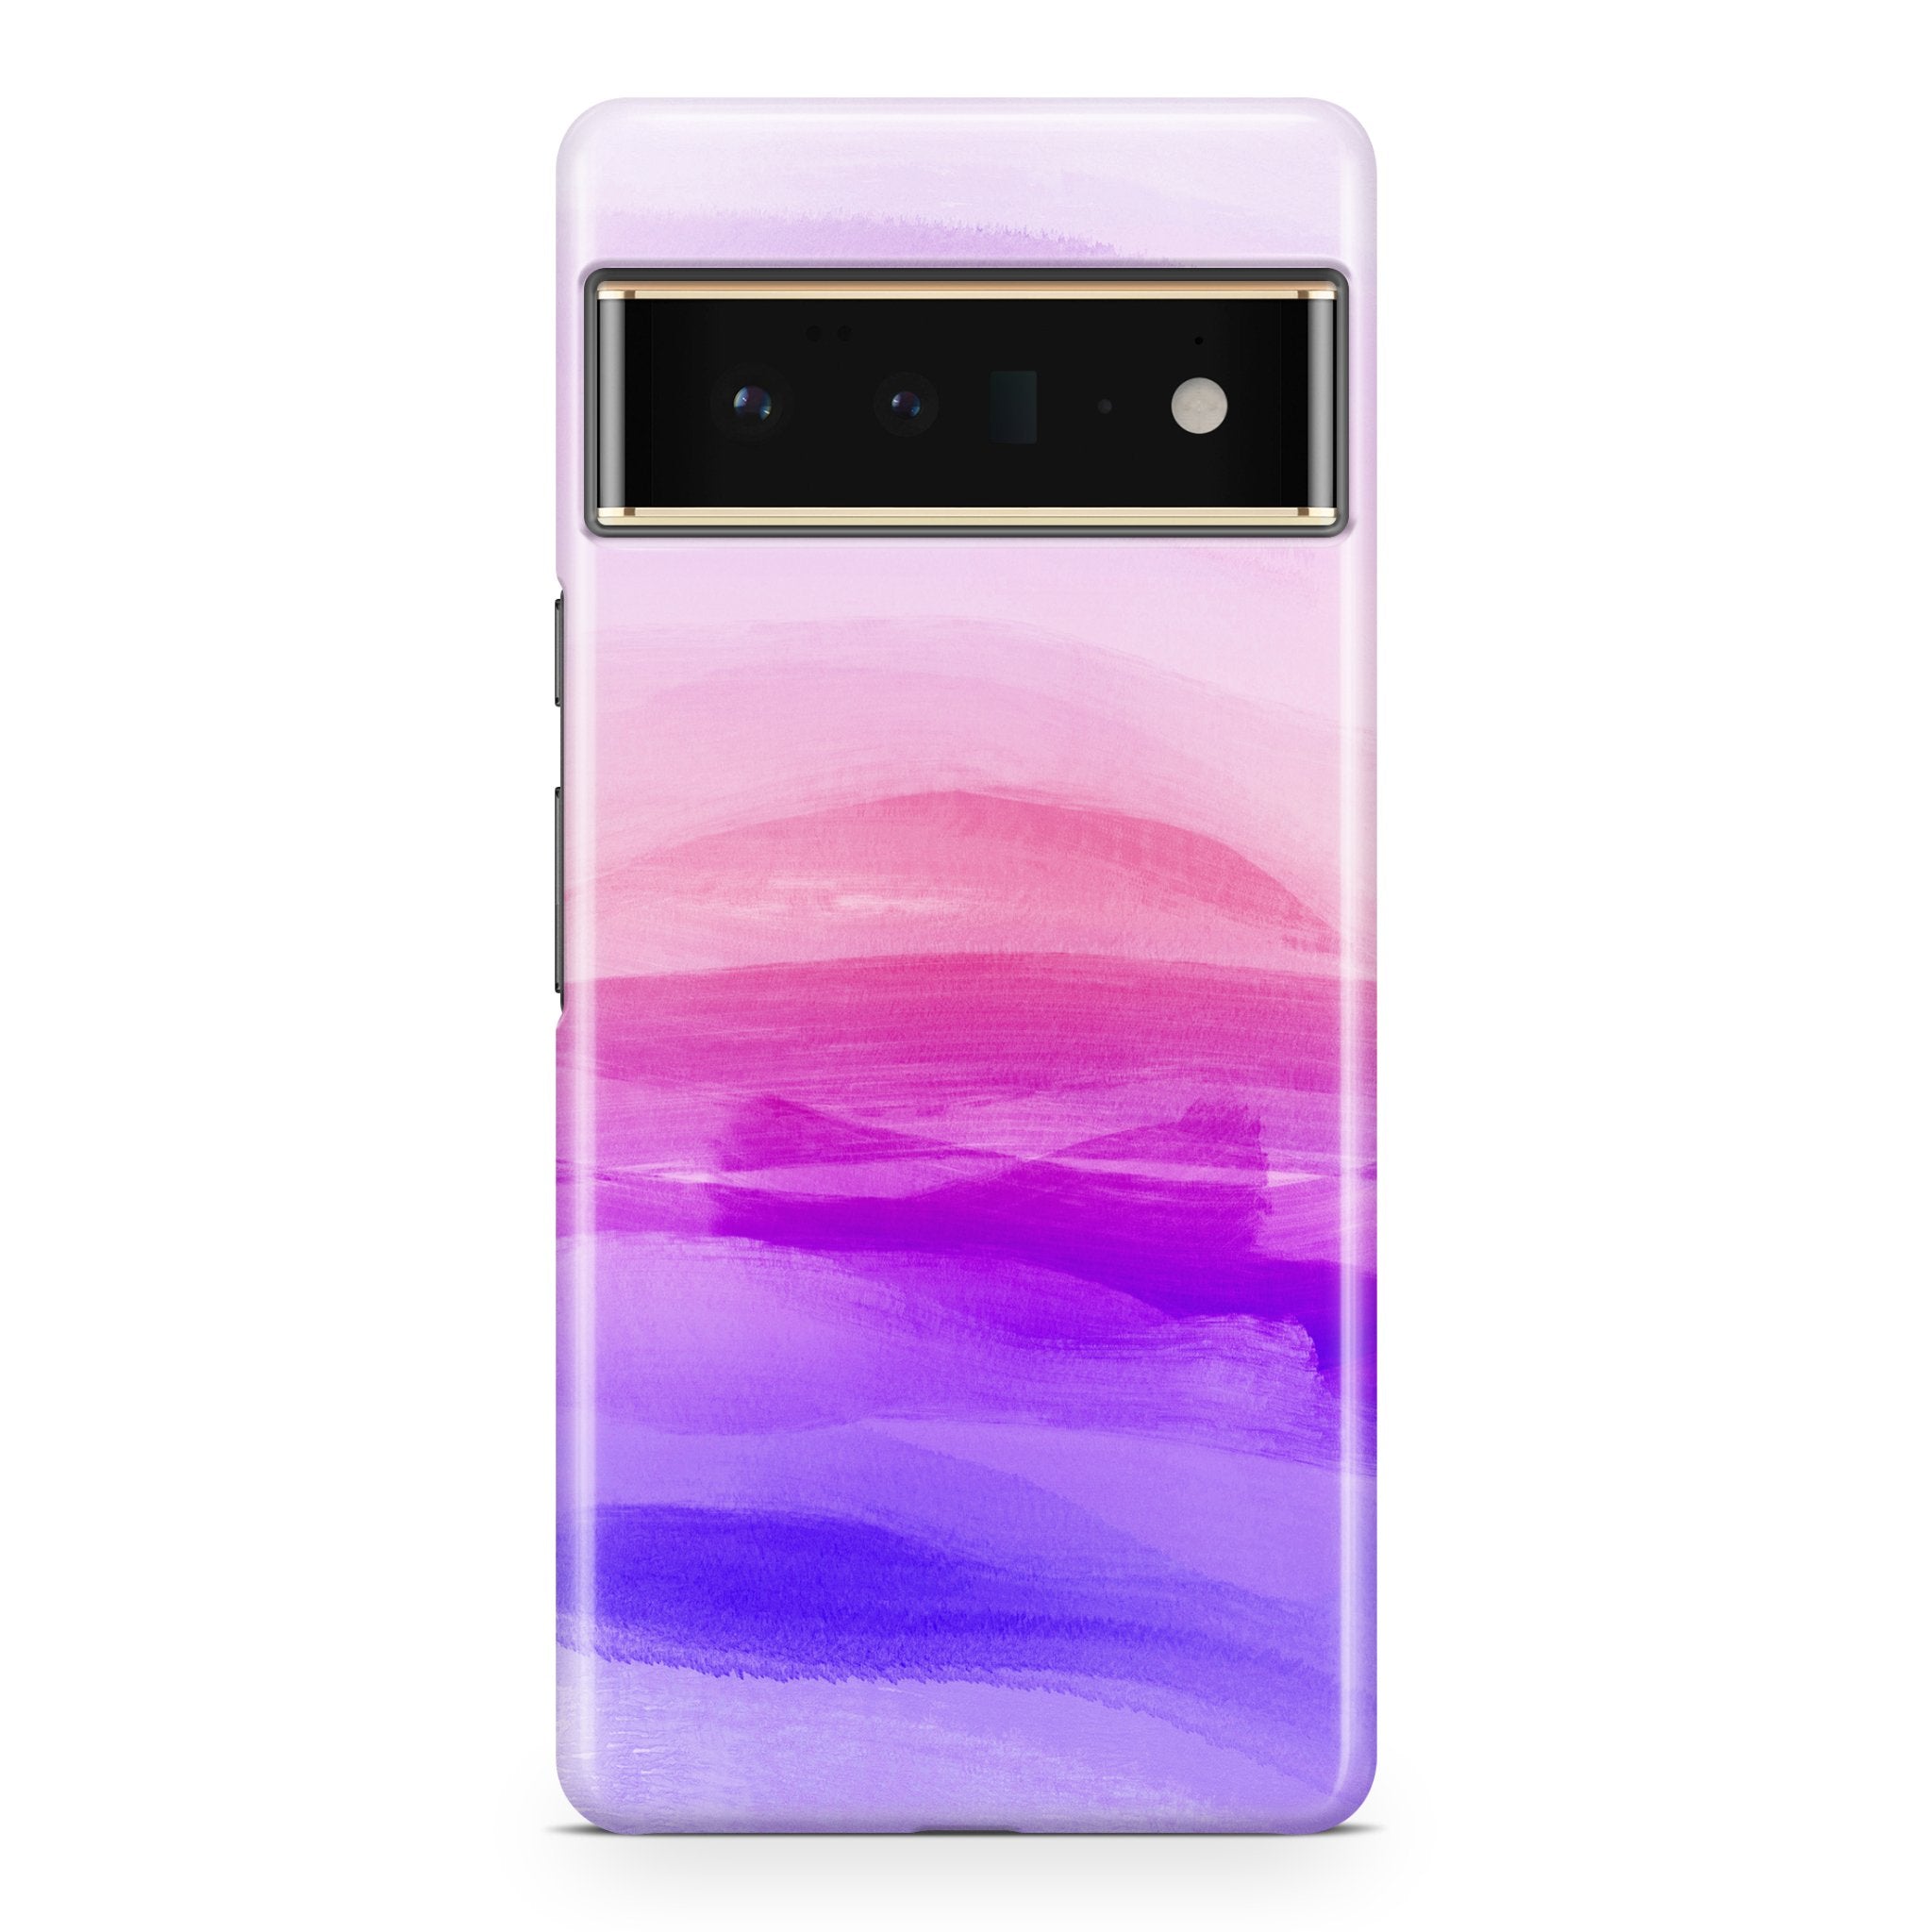 Sunrise Pink Ombre - Google phone case designs by CaseSwagger